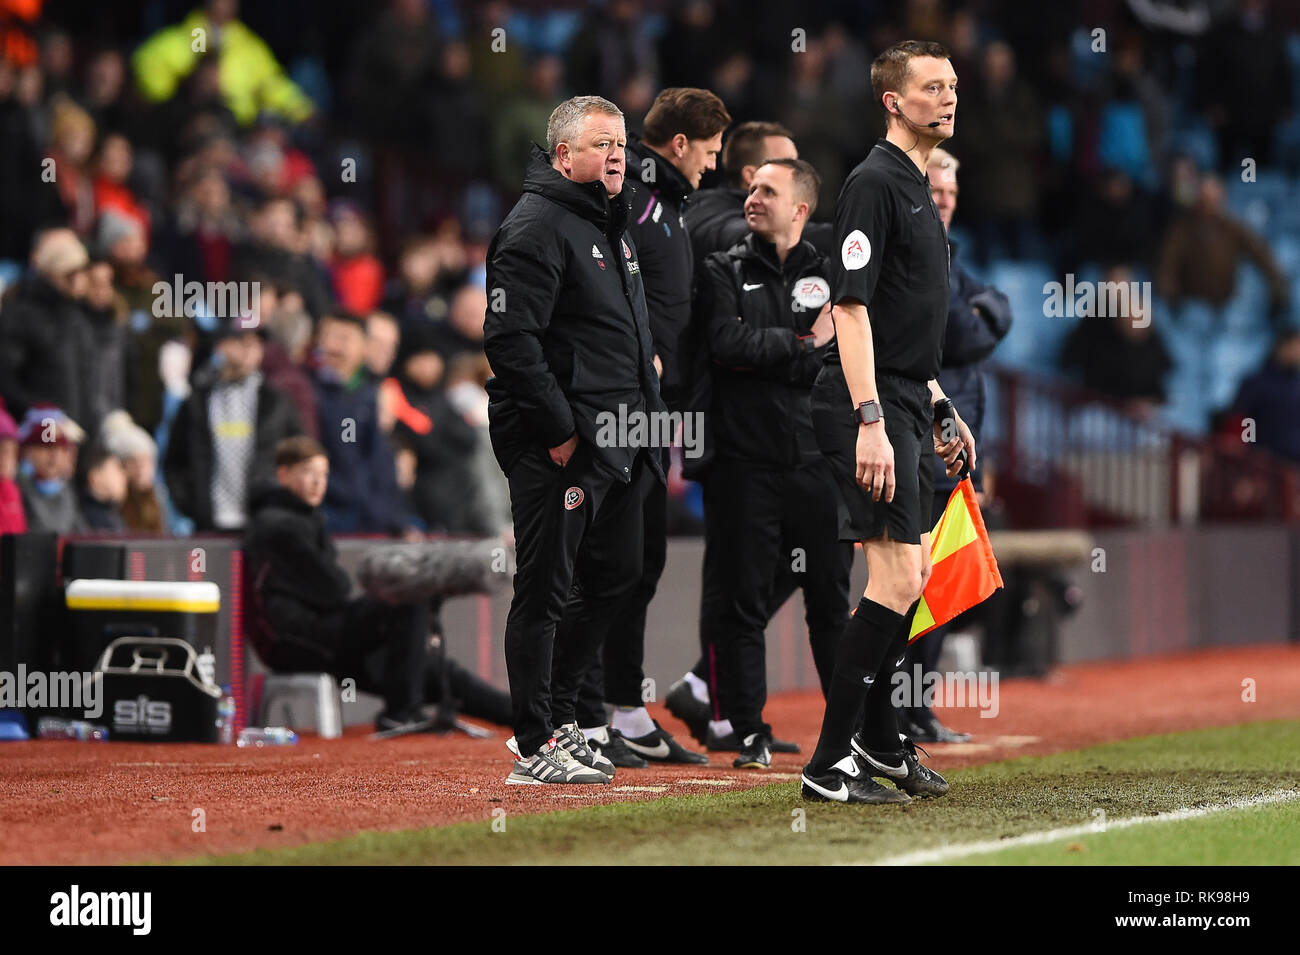 8th February 2019, Villa Park, Birmingham, England ; Sky Bet Championship, Aston Villa v Sheffield United : Sheffield United Manager Chris Wilder watches his sides 3 goal lead slip away  Credit: Jon Hobley/News Images  English Football League images are subject to DataCo Licence Stock Photo